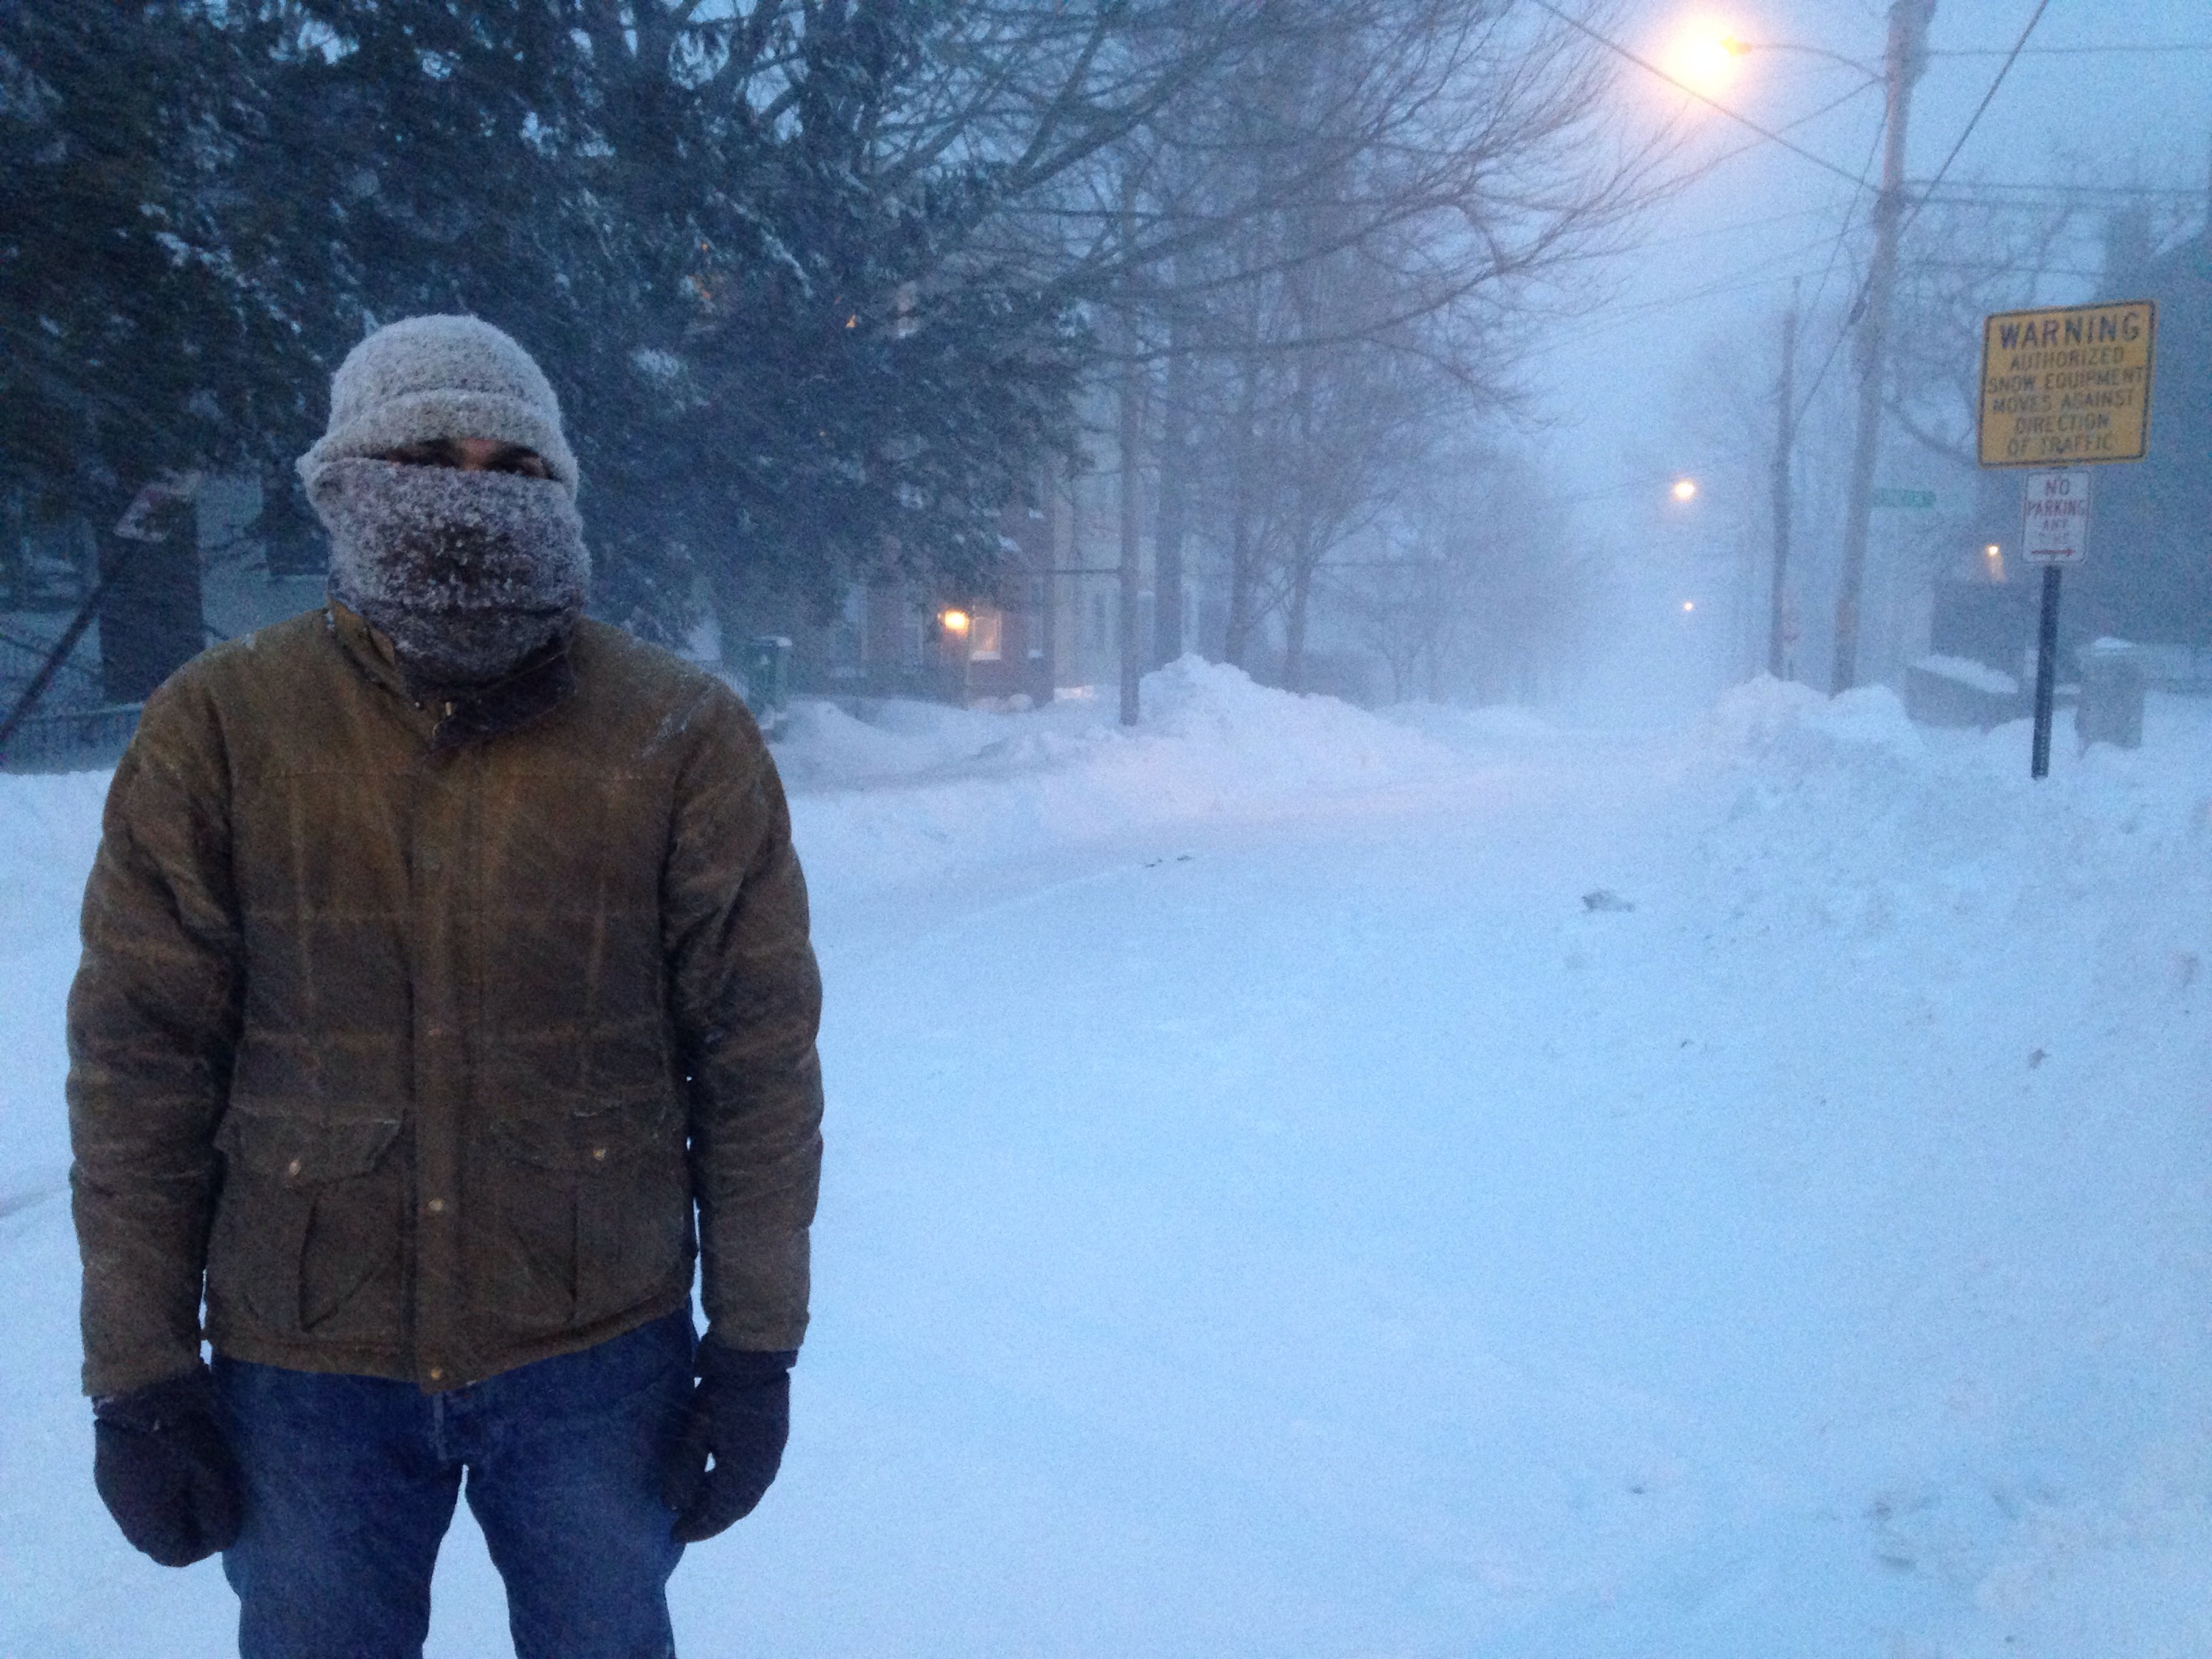 Blizzard Juno hits Portland Maine, and the bearded fellow is ready with warm woolen knits.